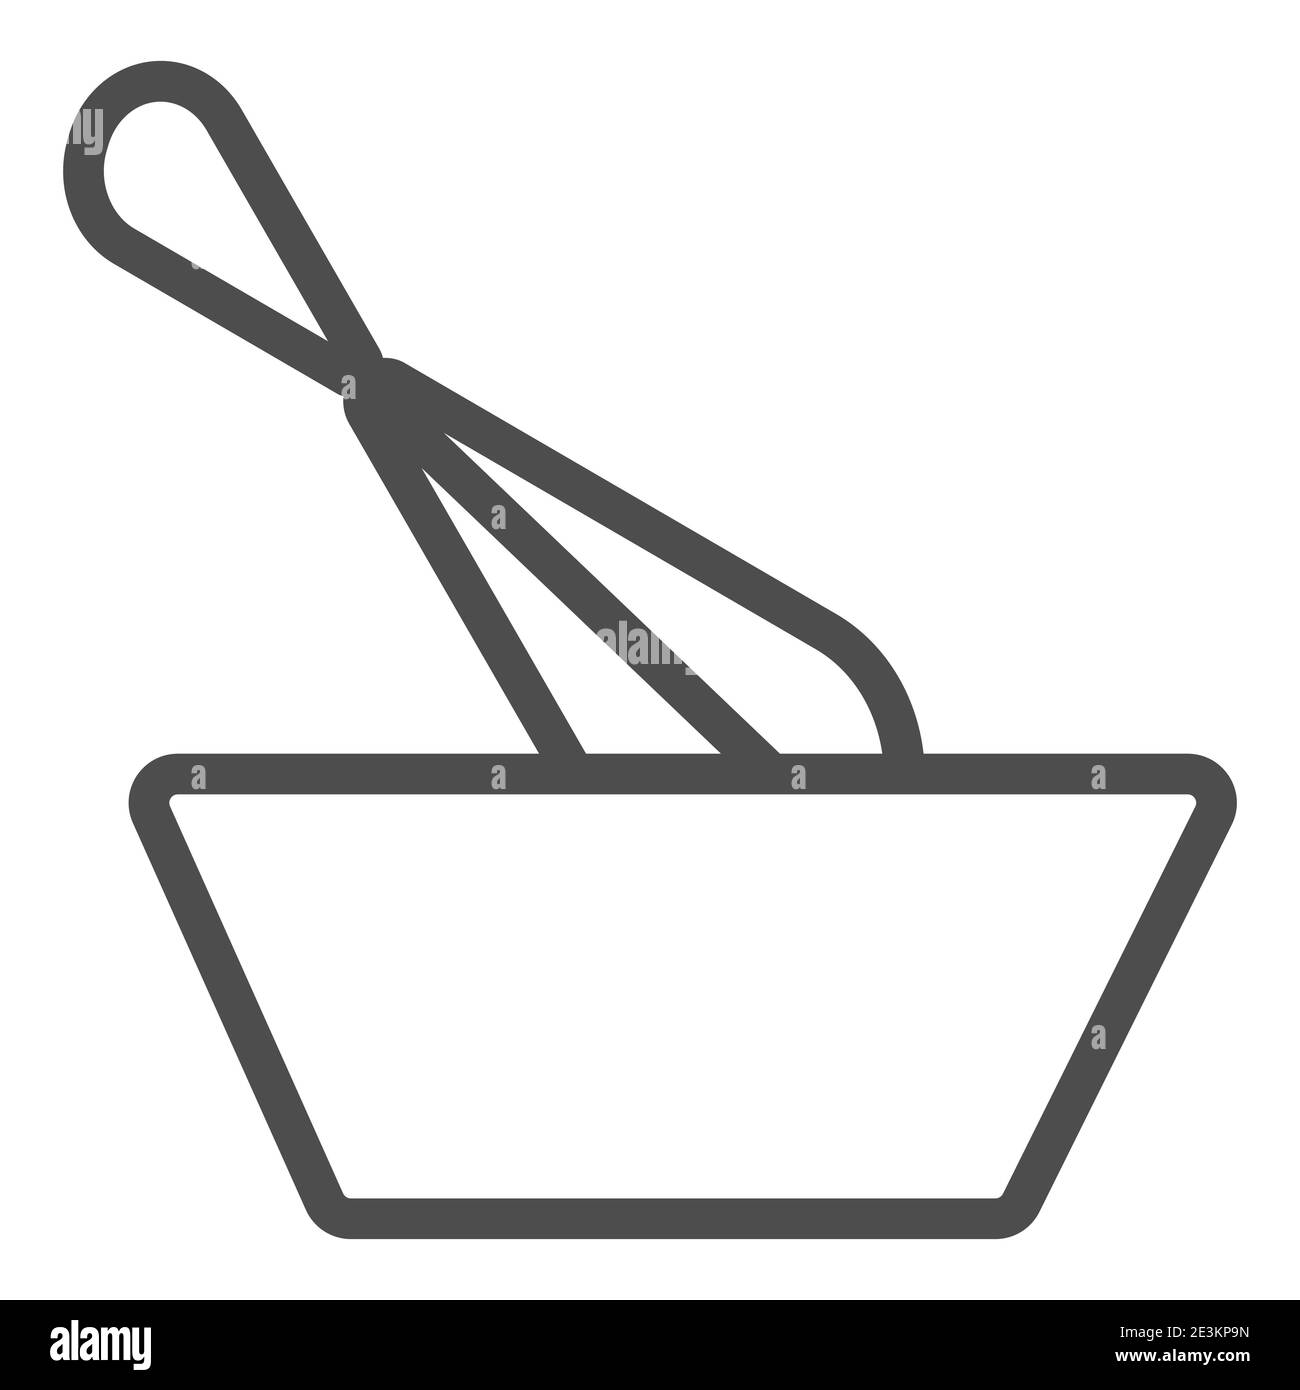 https://c8.alamy.com/comp/2E3KP9N/wisk-and-bowl-line-icon-cooking-concept-dough-making-sign-on-white-background-mixing-with-whisk-icon-in-outline-style-for-mobile-concept-and-web-2E3KP9N.jpg